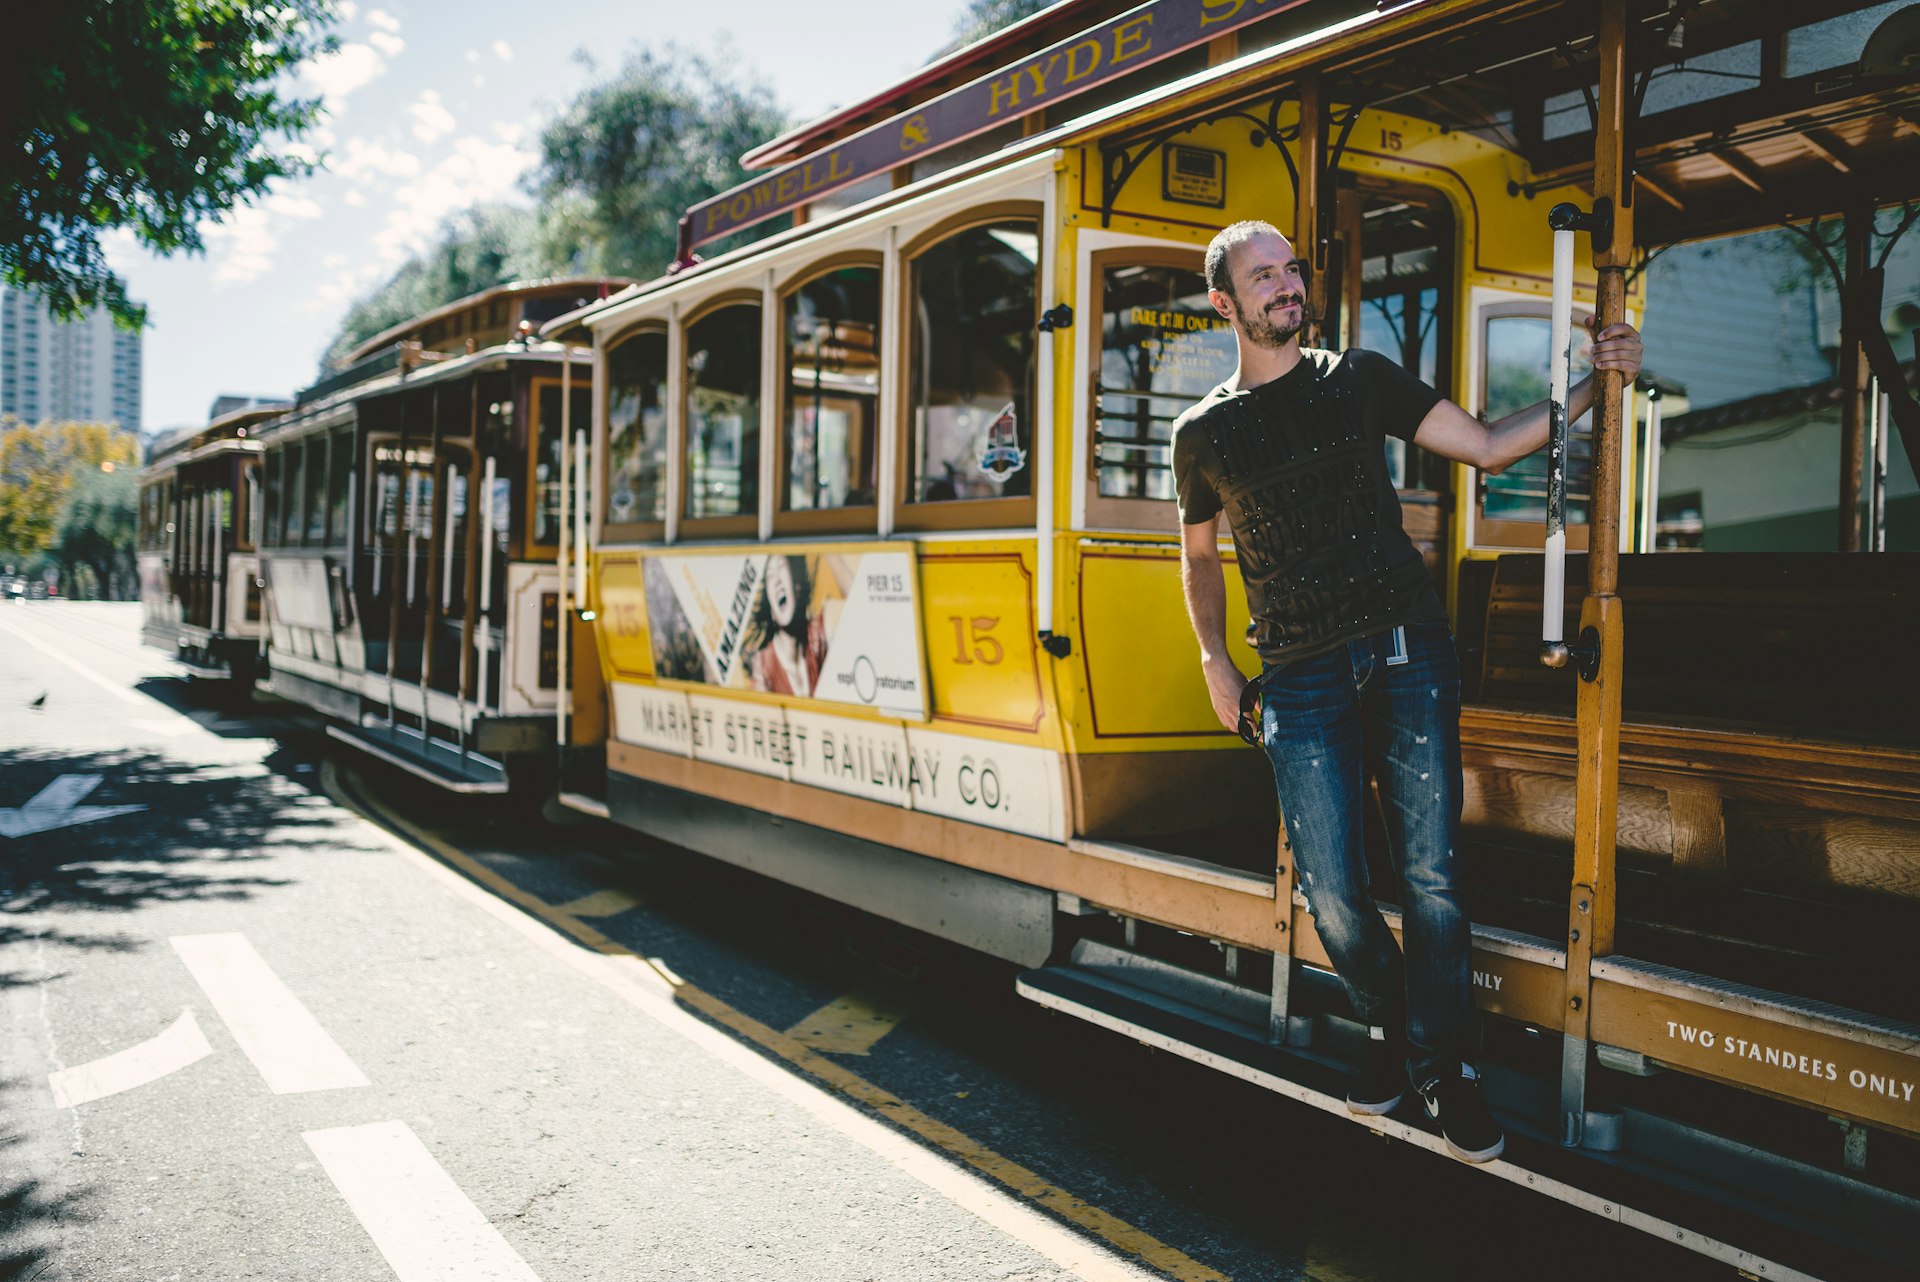 A smiling man rides a yellow historic streetcar in San Francisco during the daytime